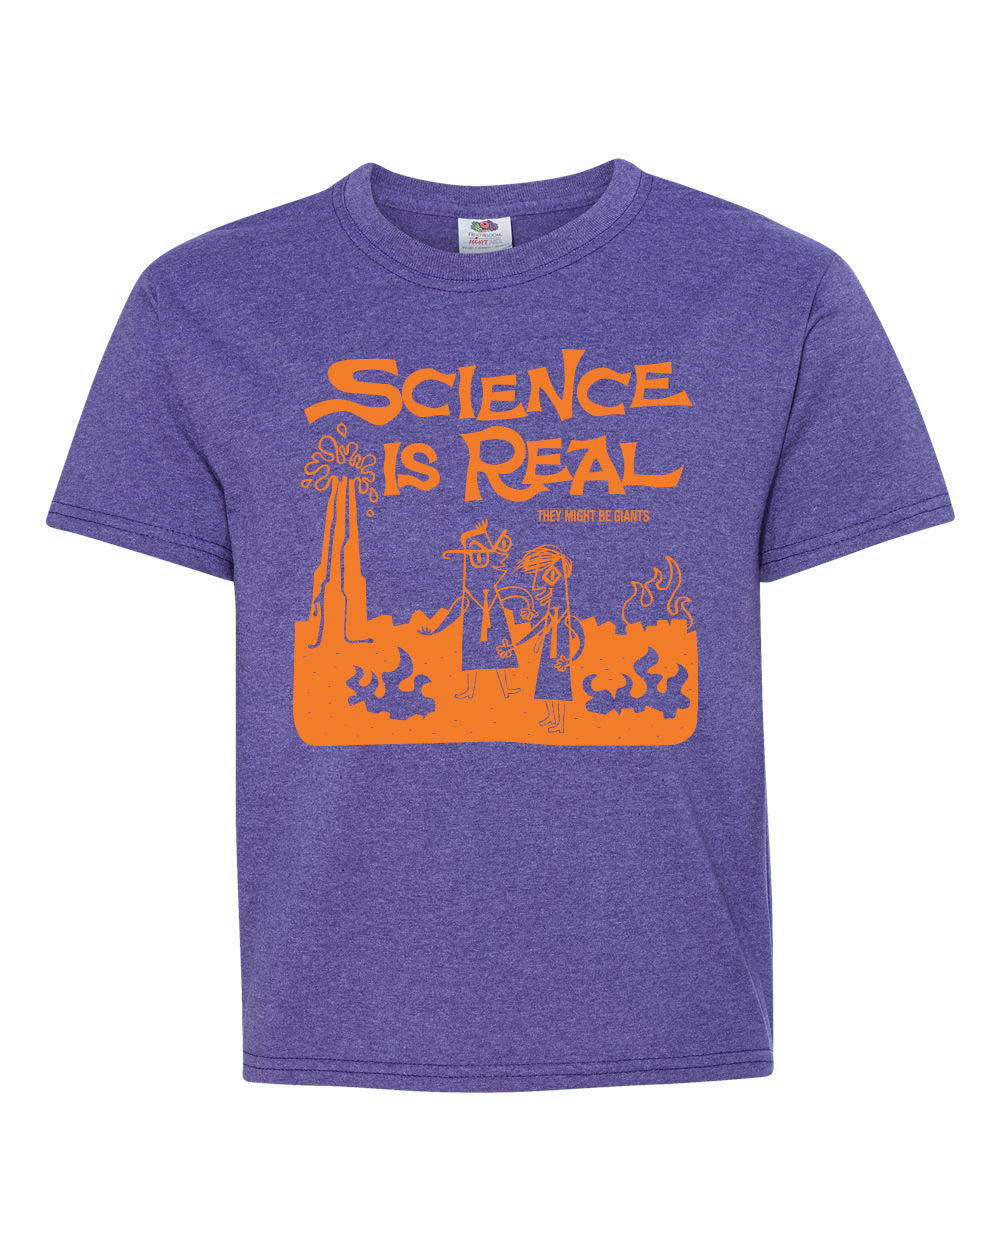 Science is Real Purple T-Shirt (Youth)